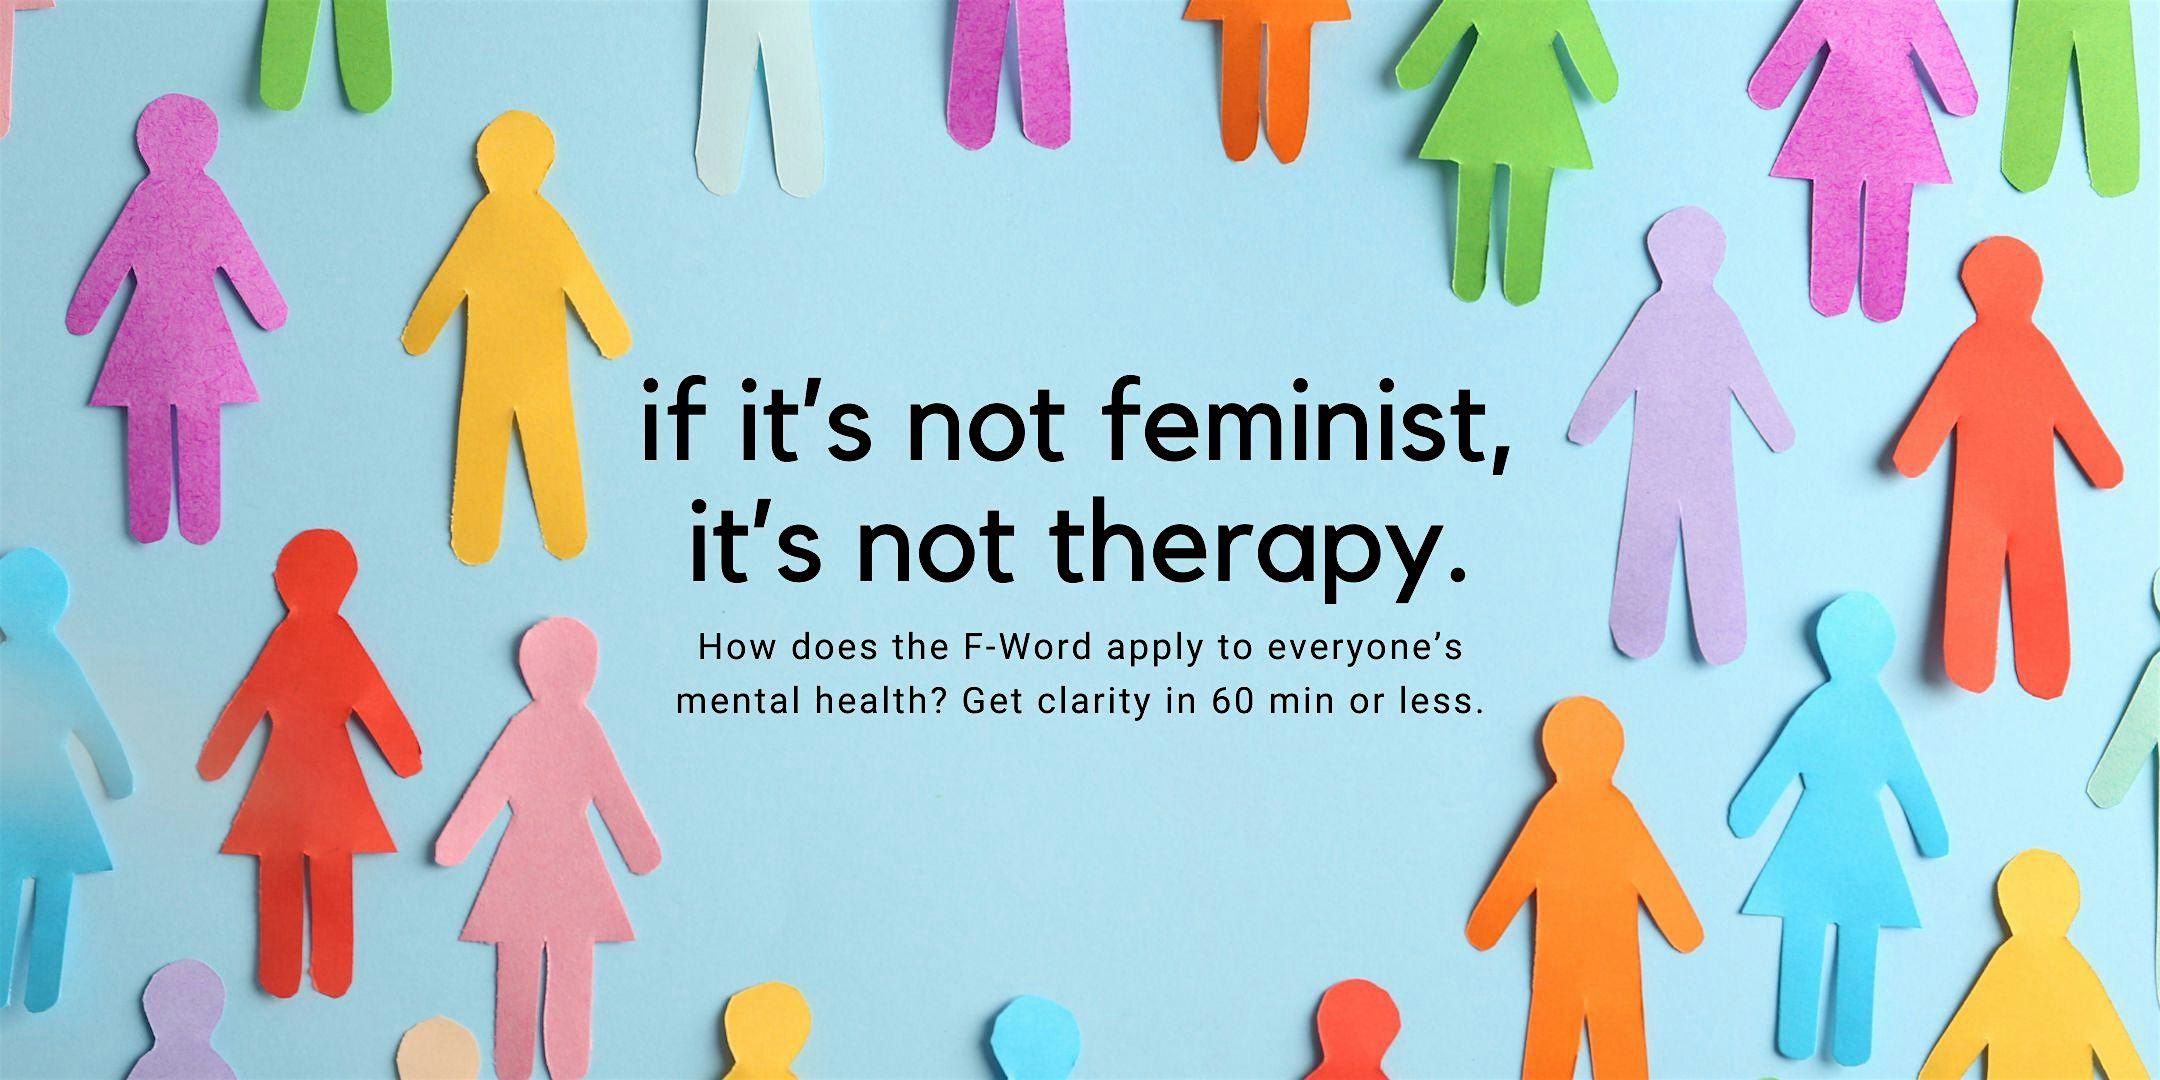 If it’s not feminist, it’s not therapy.